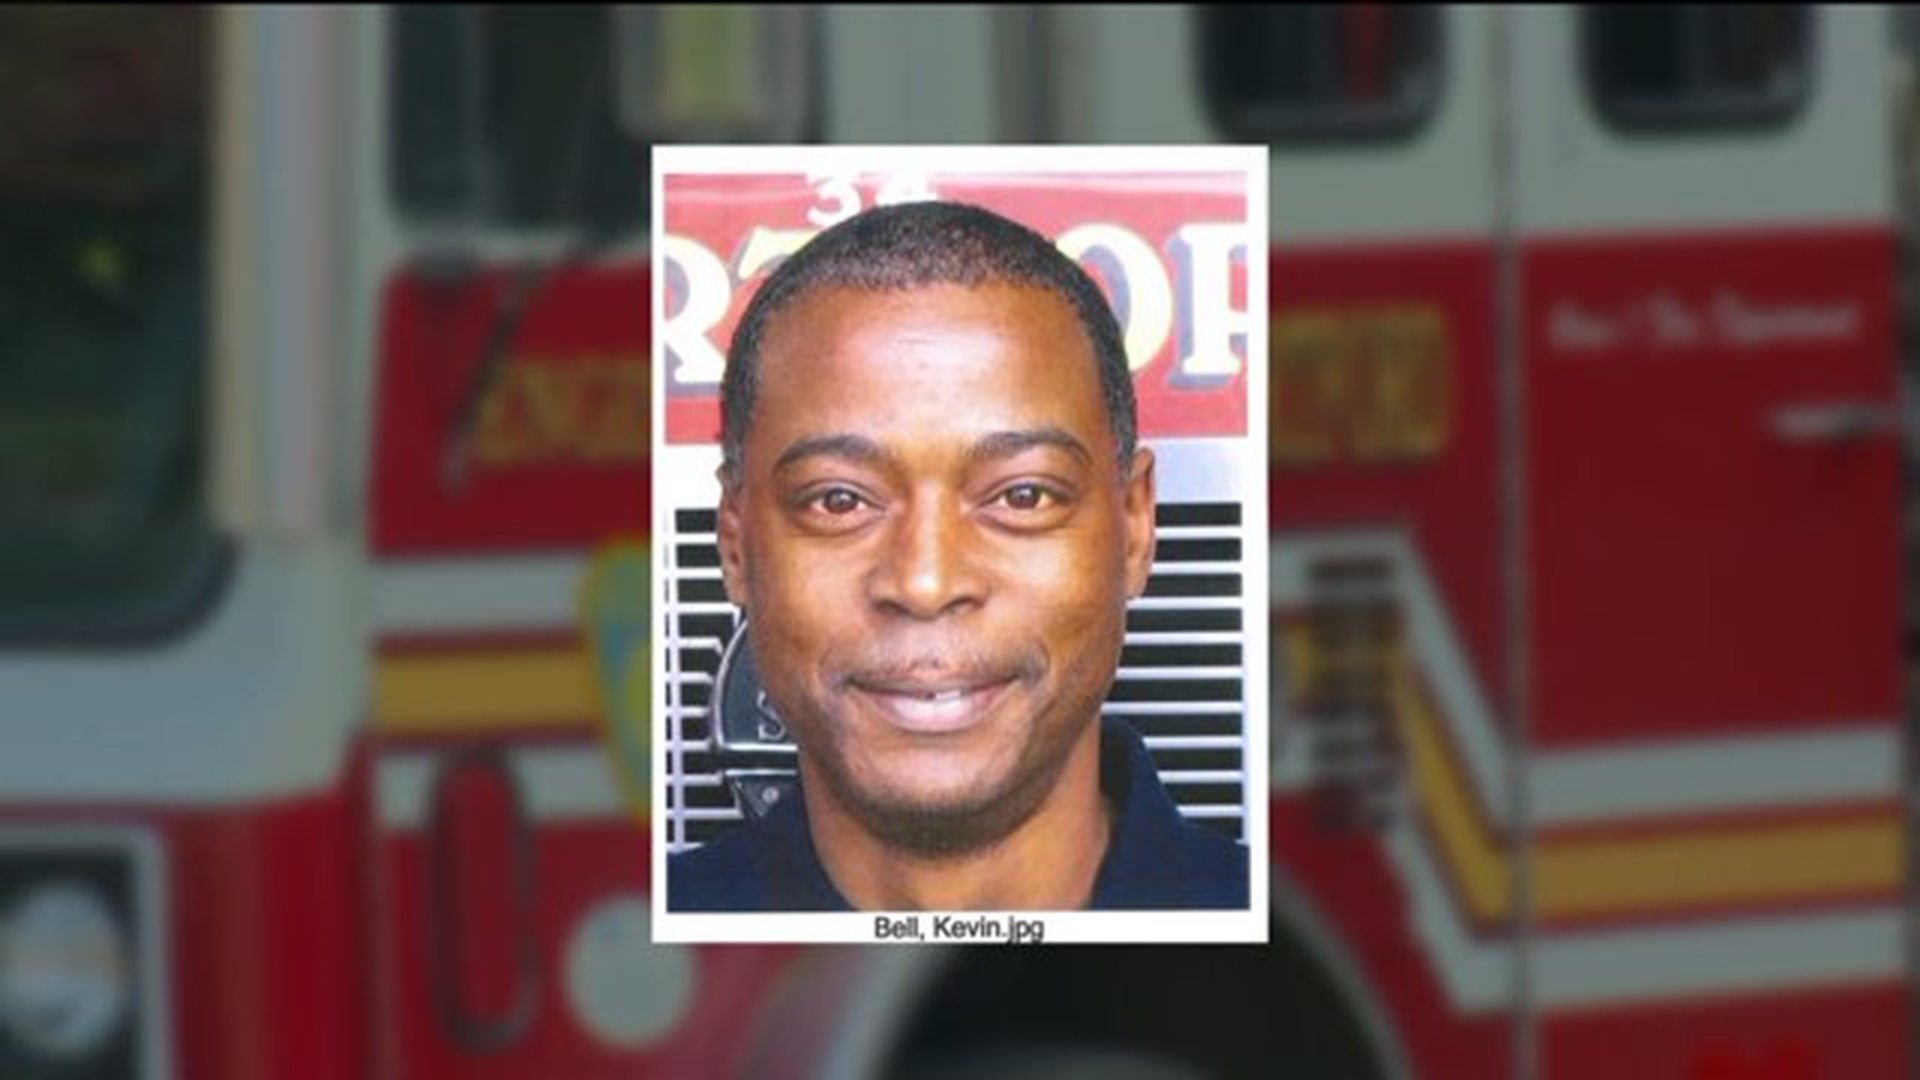 Cause of death released for firefighter Kevin Bell